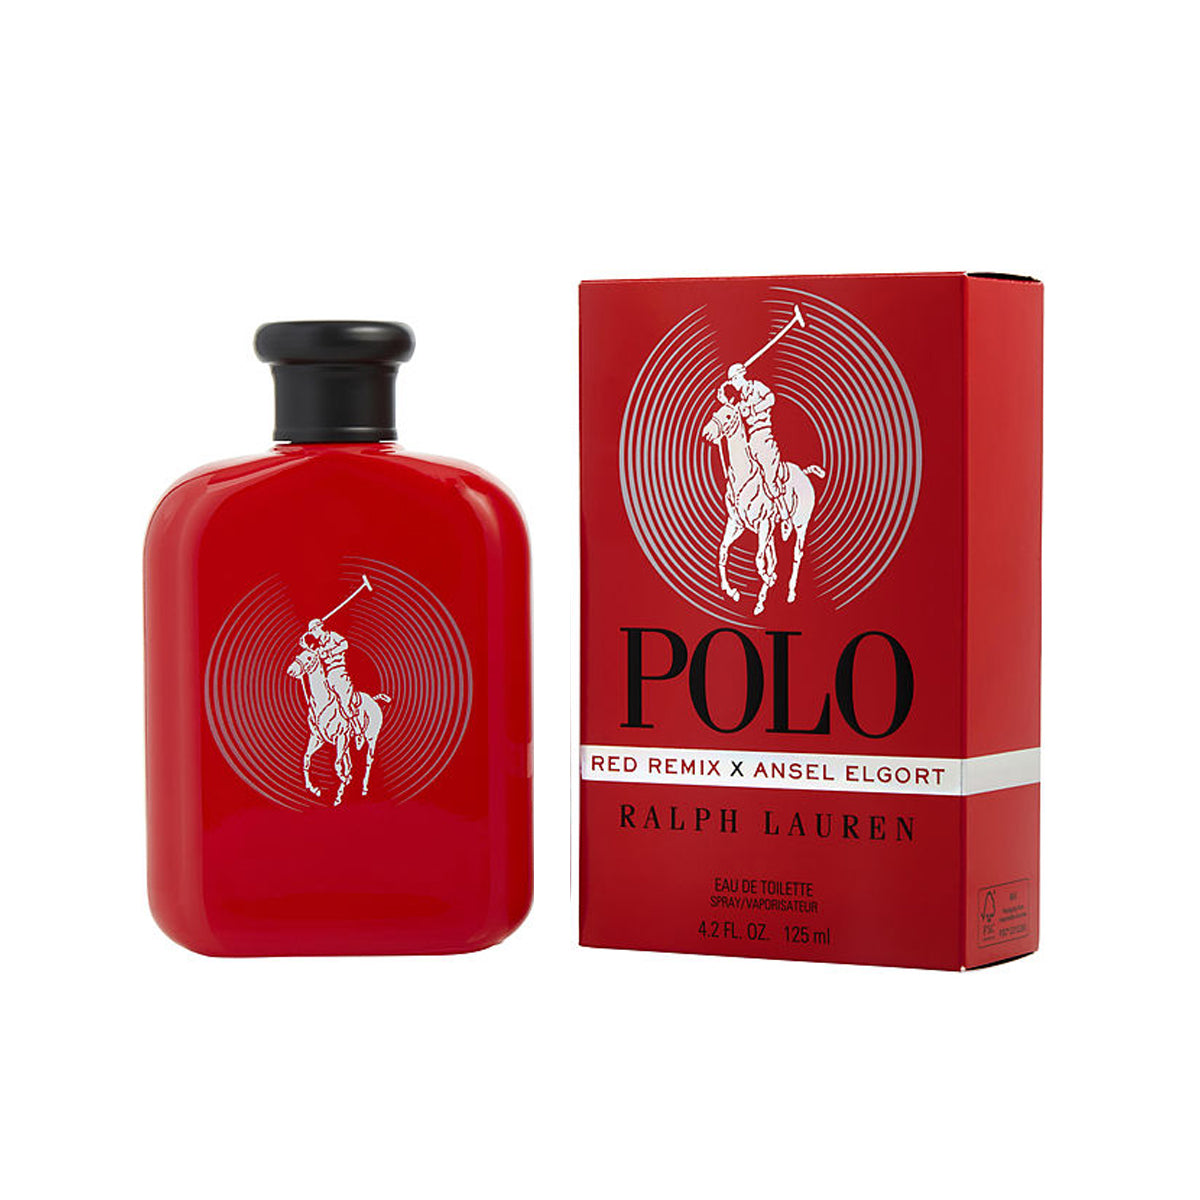 Polo Red Remix x Ansel Elgort Edt 125ml Hombre